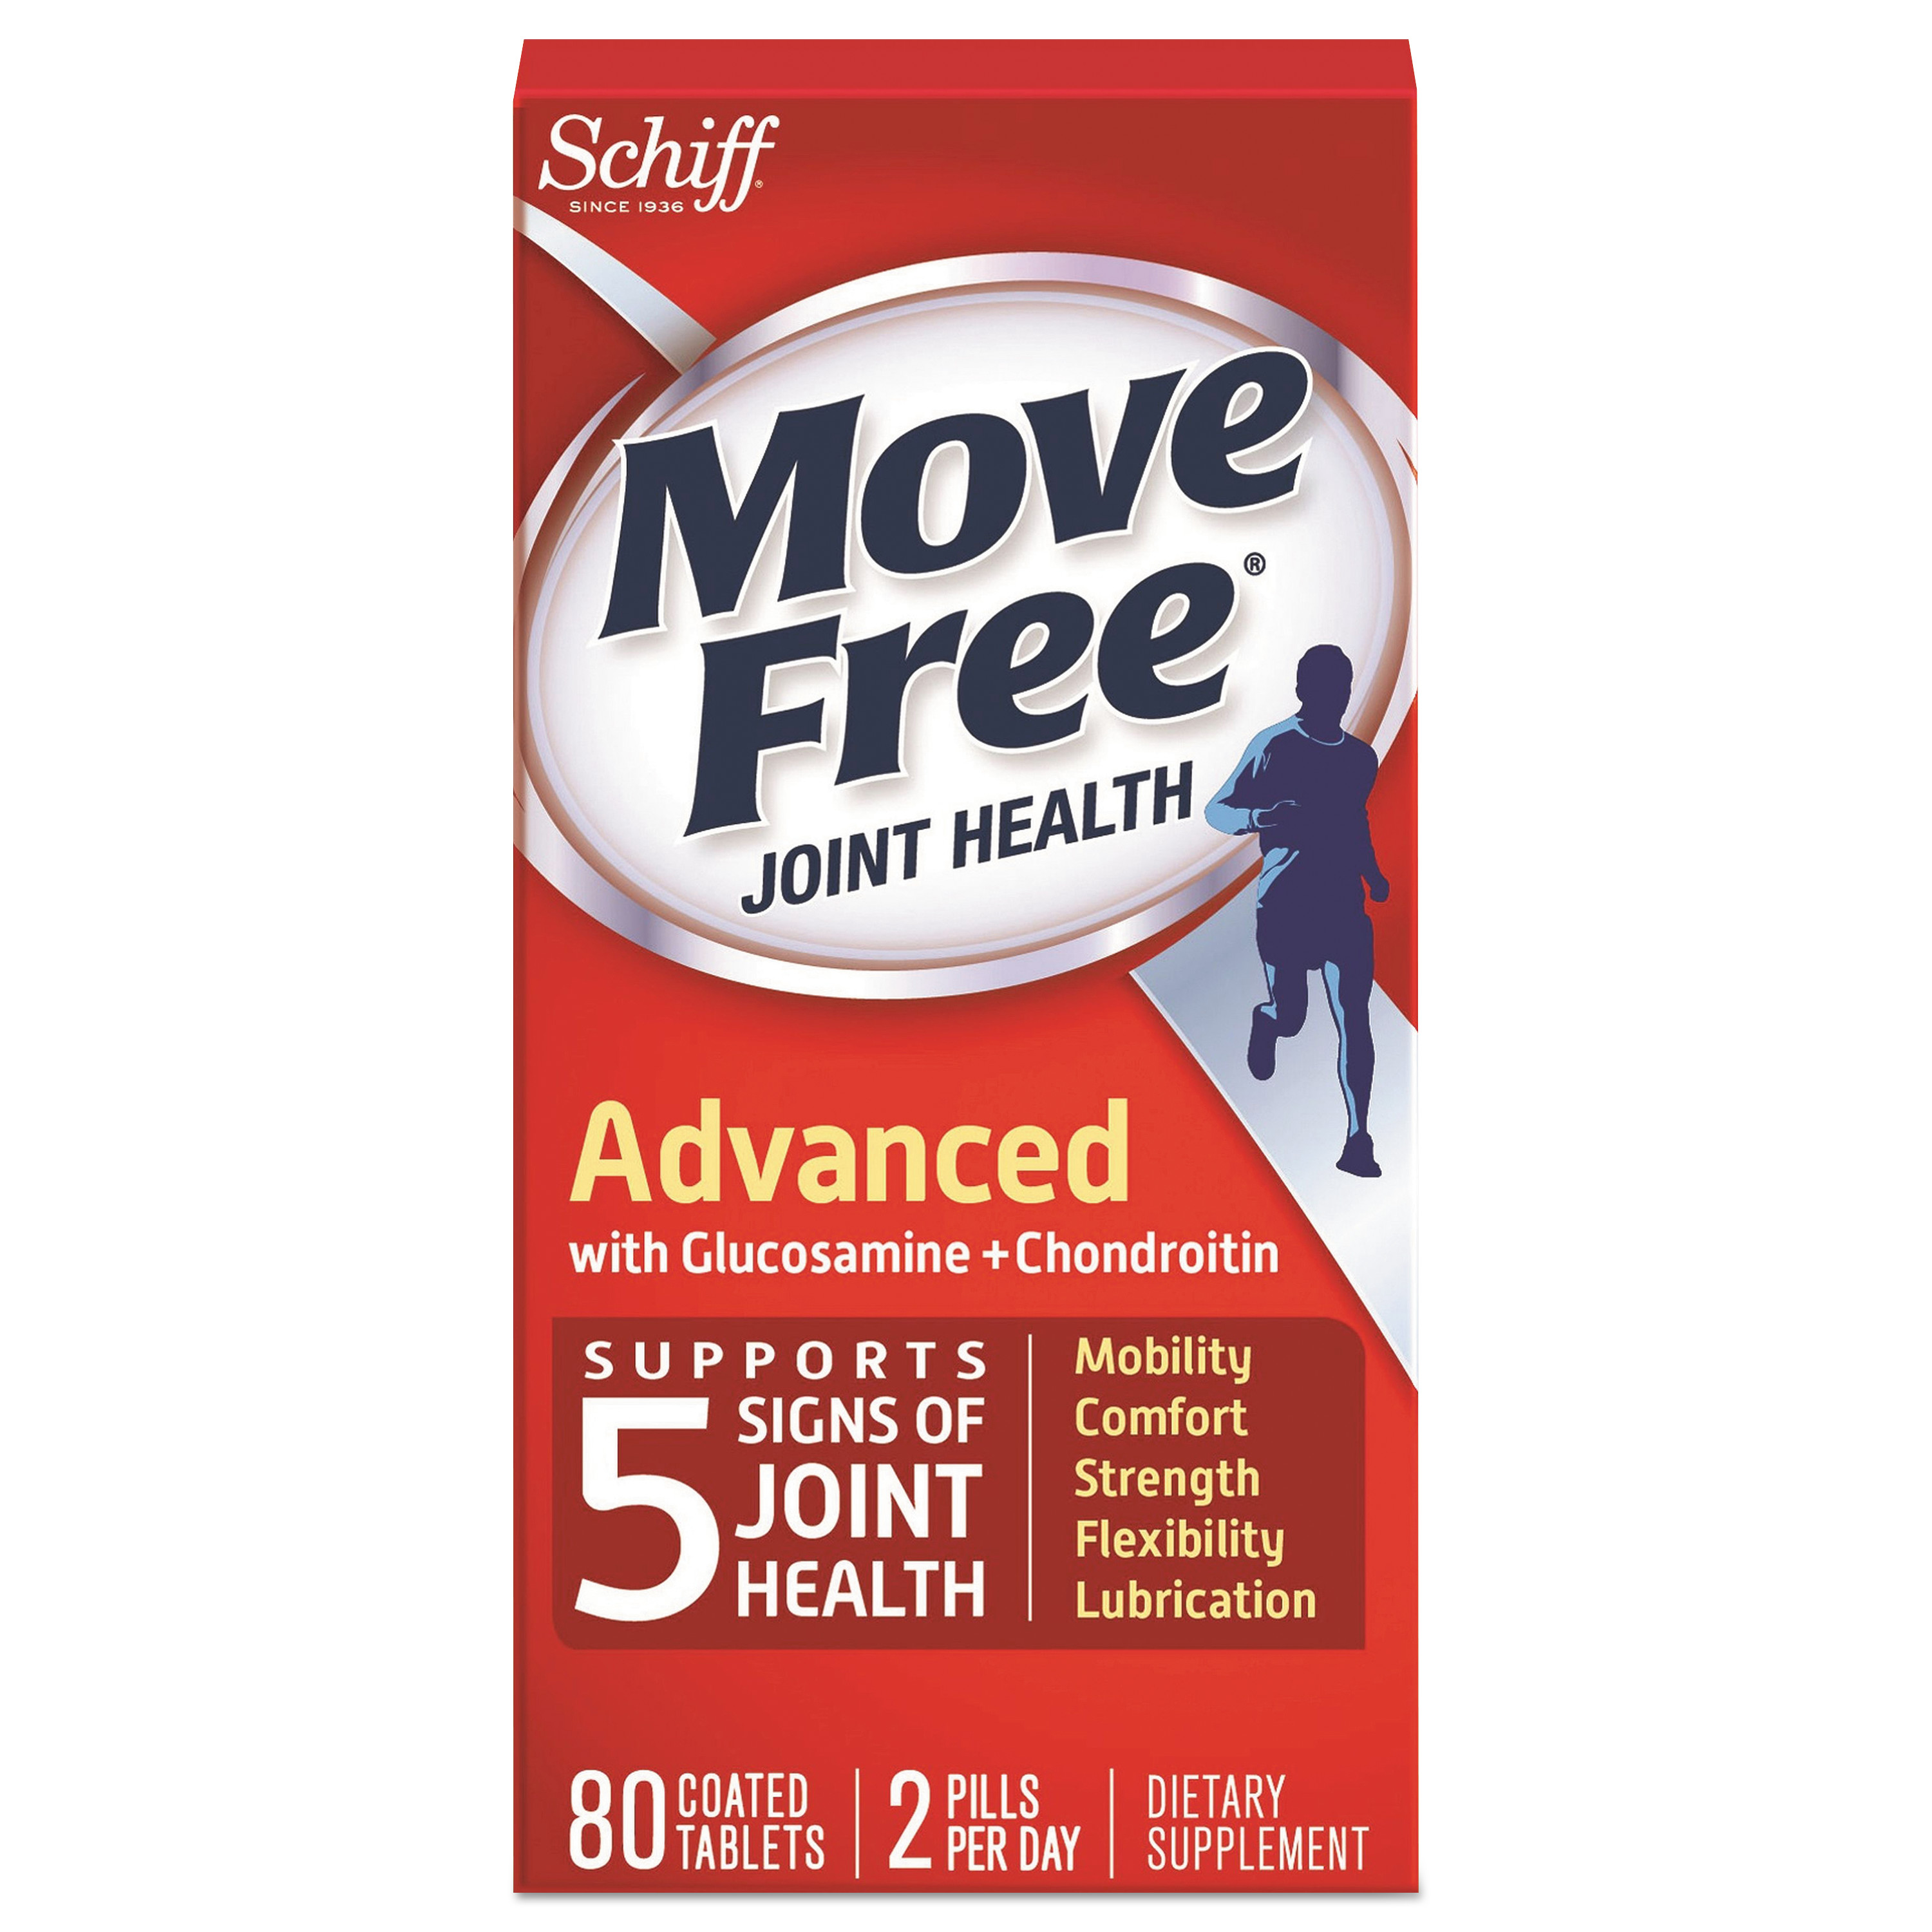  Move Free 20525-97009 Advanced Joint Health Tablet, 80 Tablets (MOV97009EA) 